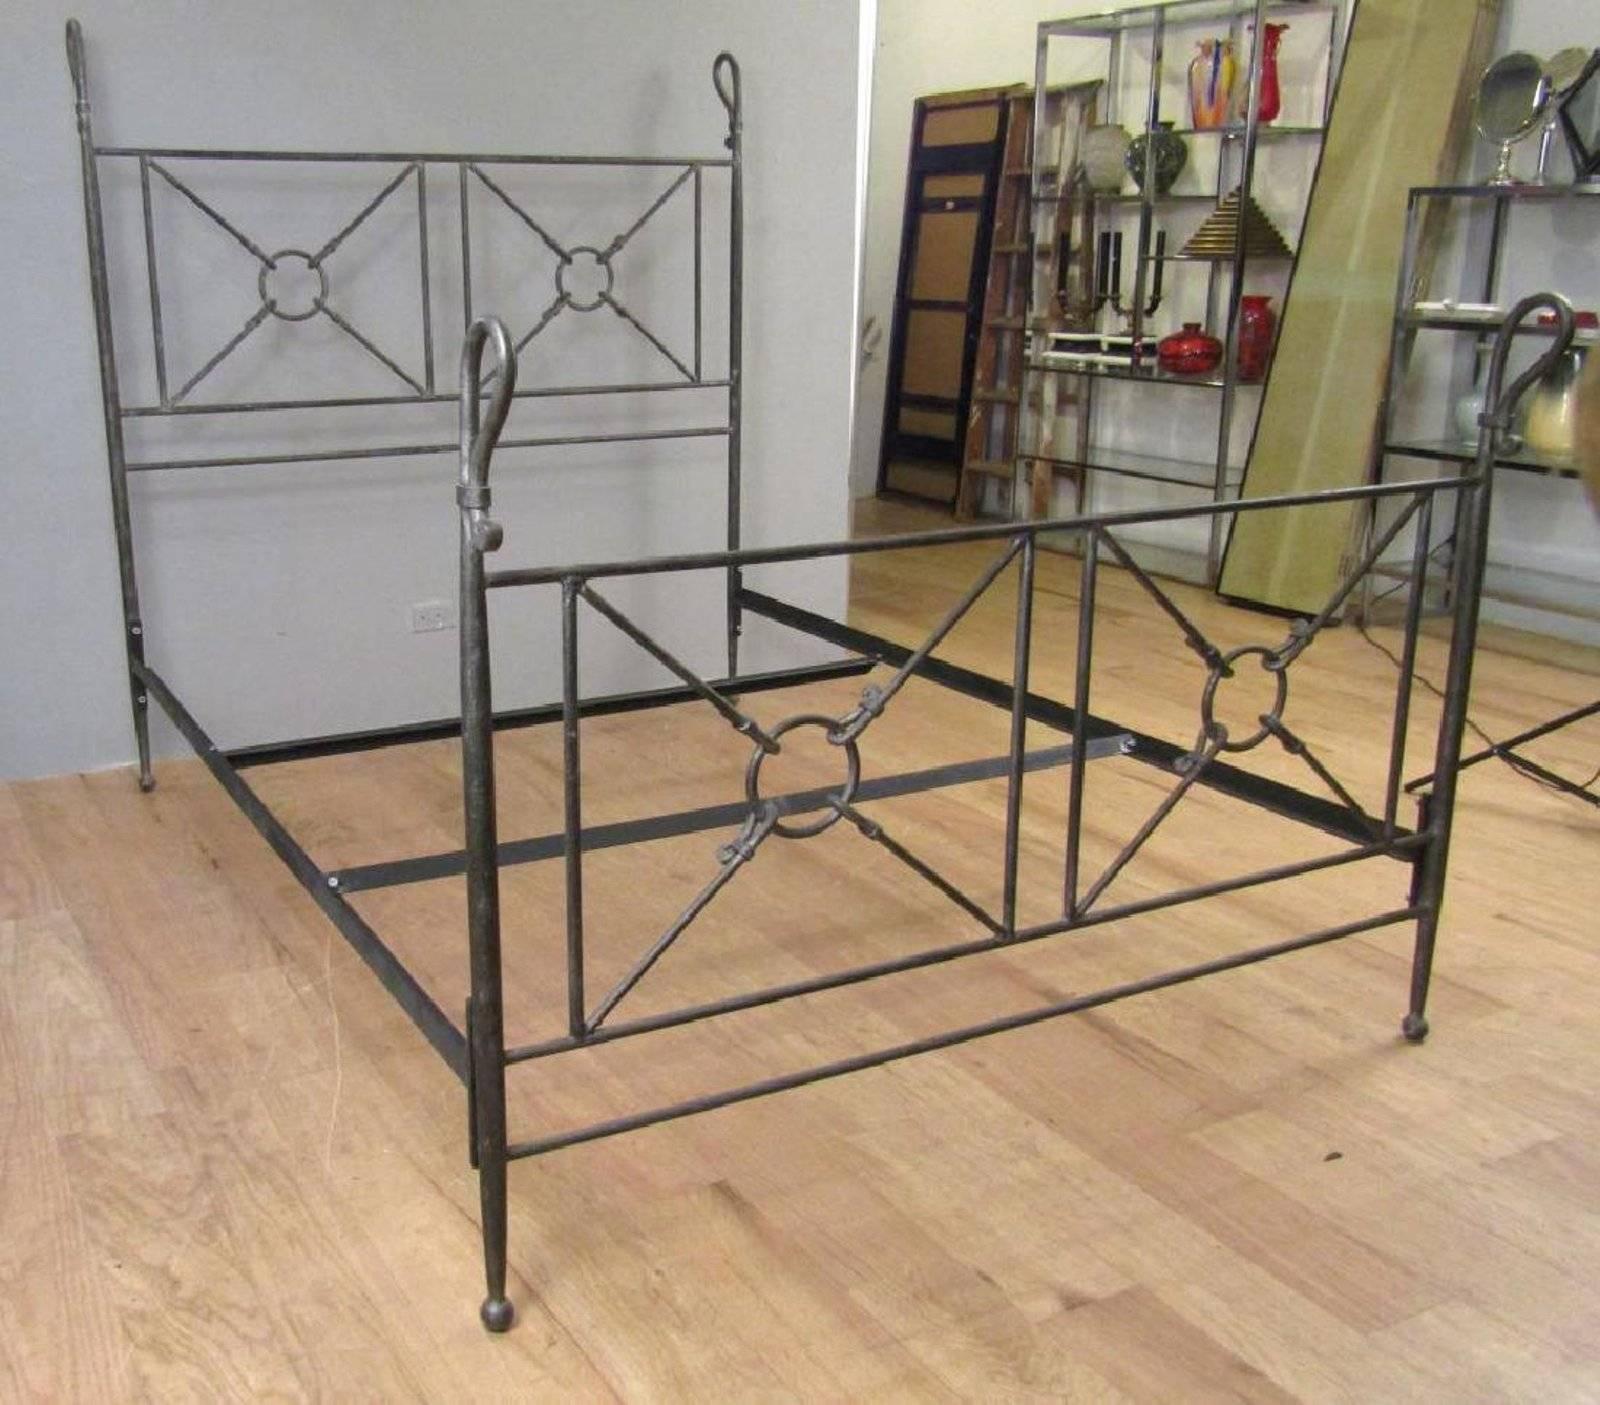 Grand Tour Roman style forged iron queen-size bed, consisting of a pierced headboard with the crook motif finials, complete with the side rails. Excellent distressed metal finish, strong and sturdy construction 
Measures: 87